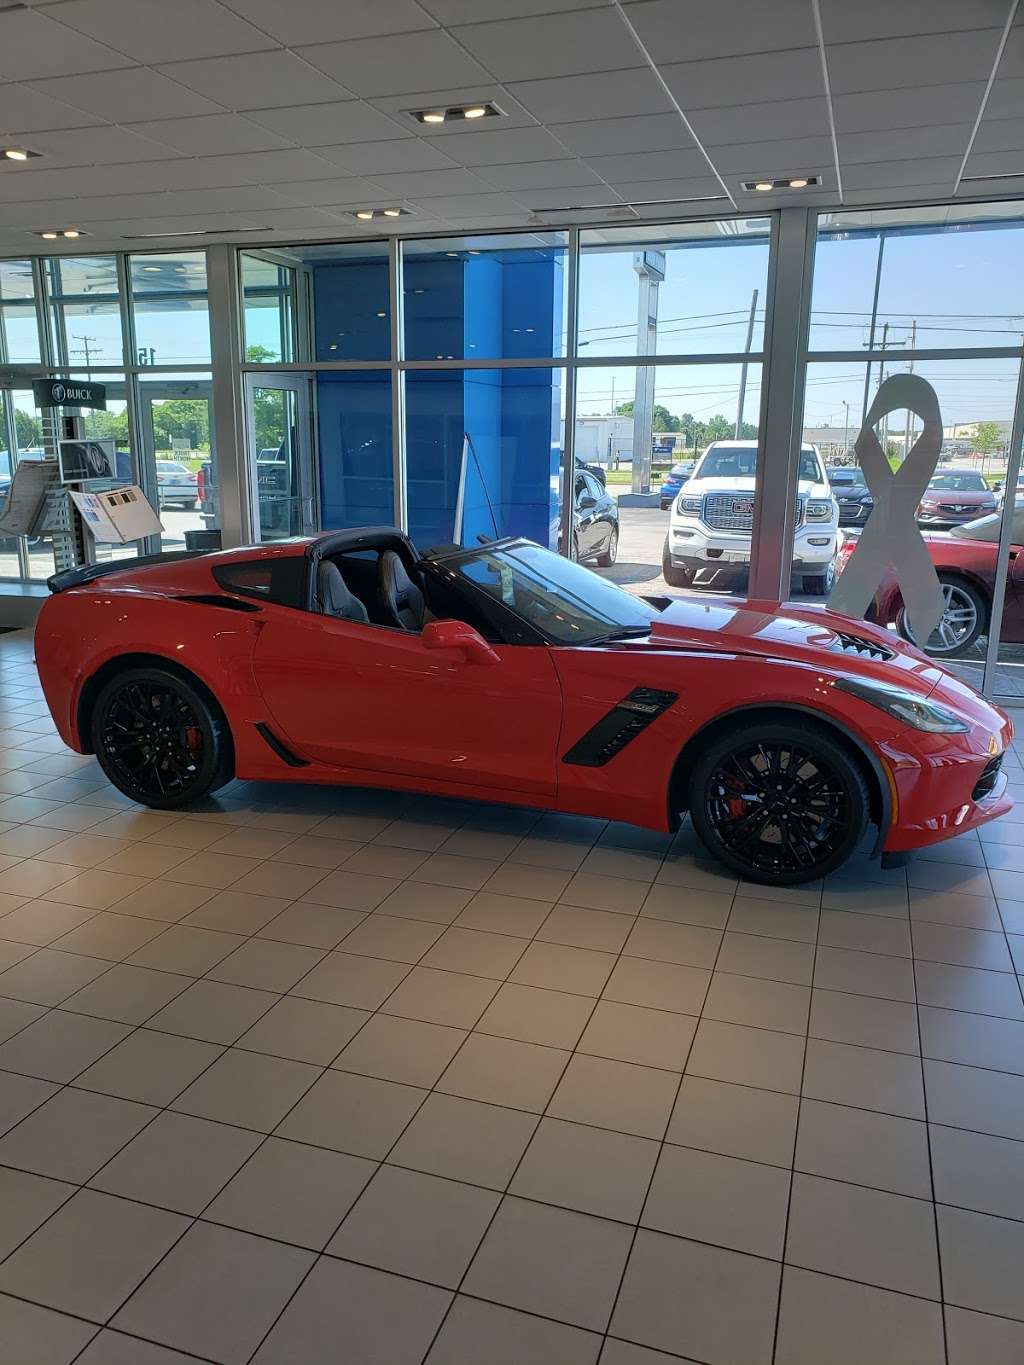 York Chevrolet Buick GMC | 1501 Indianapolis Rd, Greencastle, IN 46135, USA | Phone: (765) 653-8426